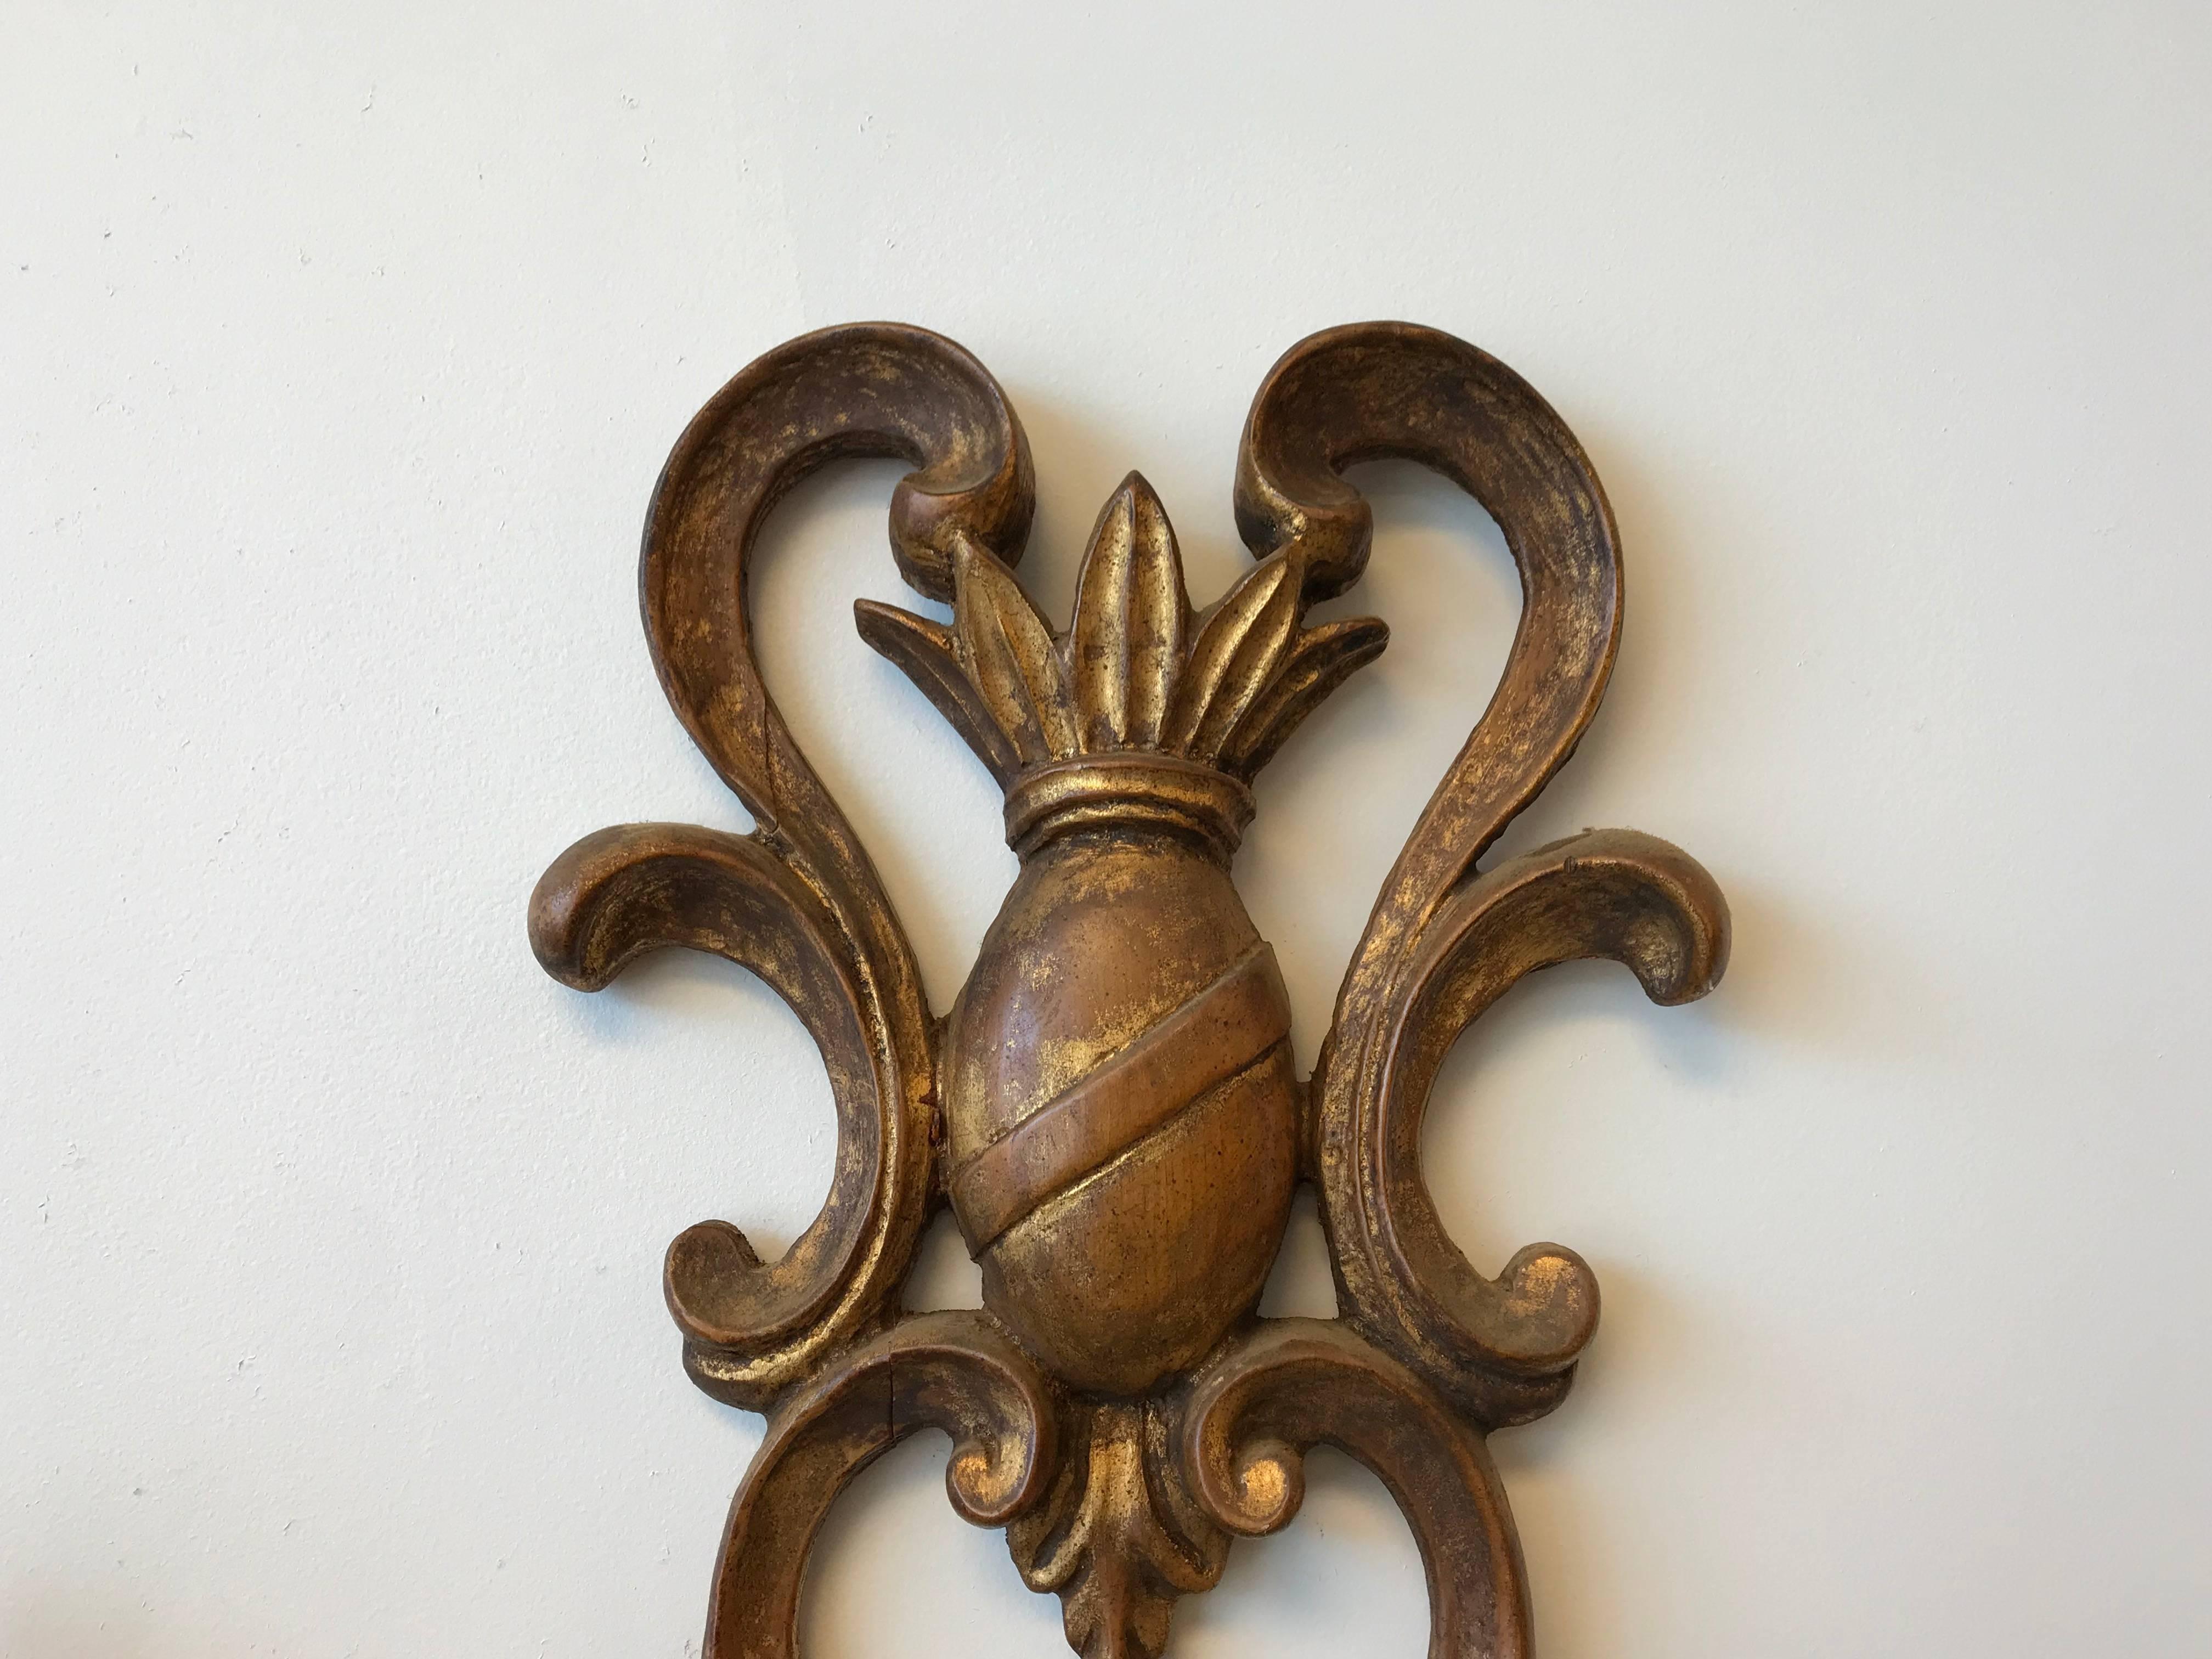 Listed is an exquisite, 19th century Italian Florentine gilded wooden, four-arm candlestick wall sconce. The piece has a lovely pineapple crest motif at the top.